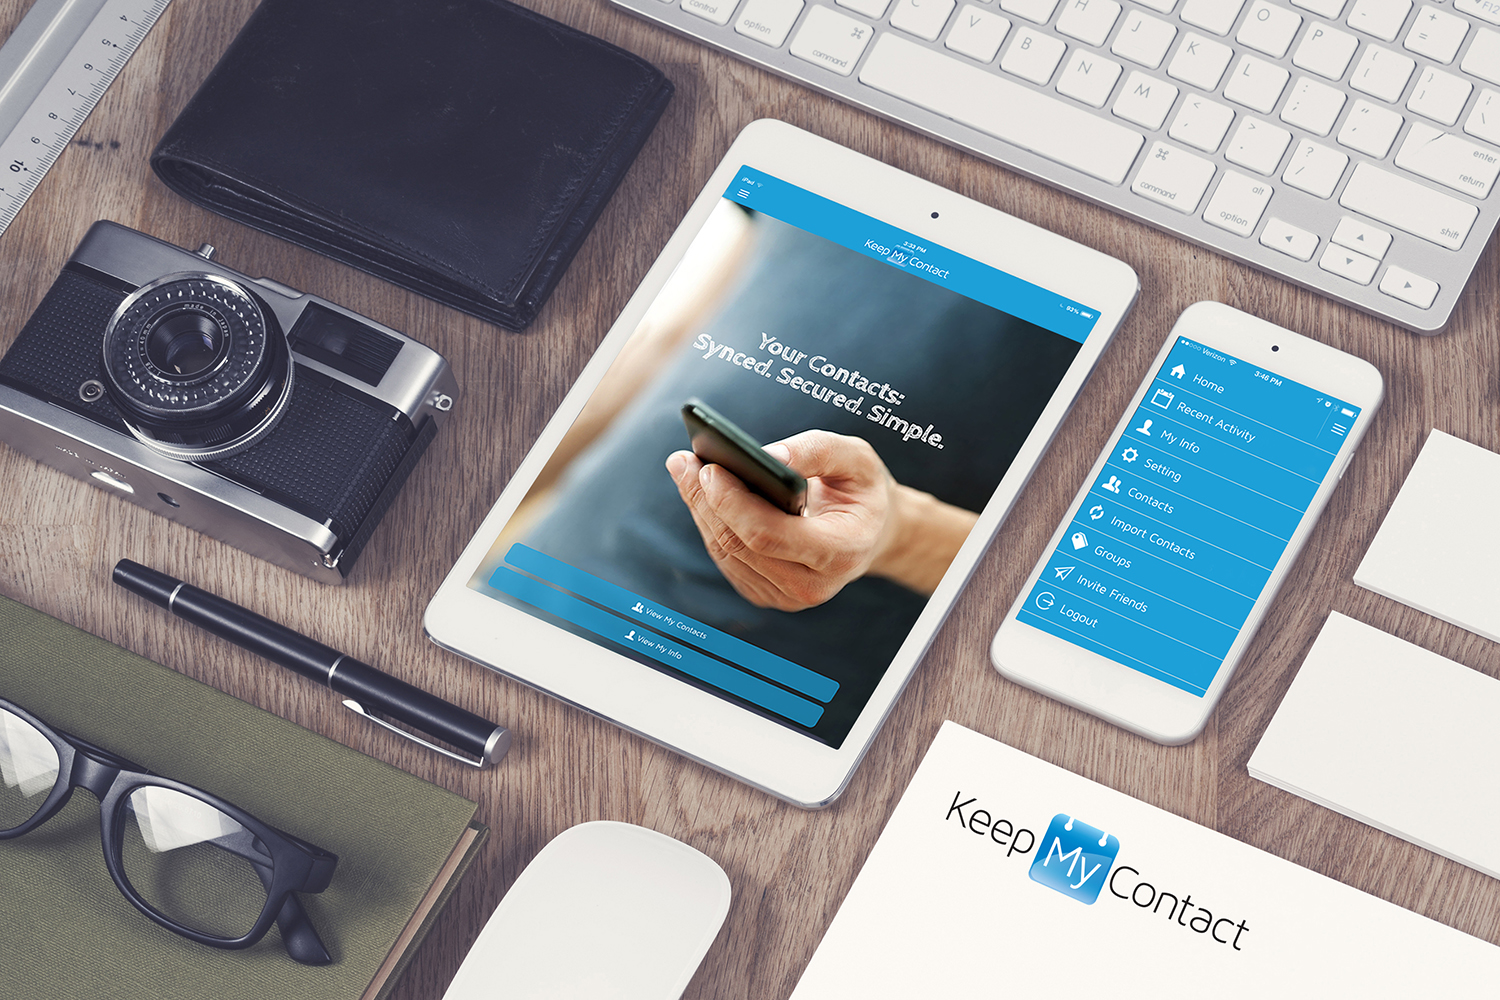 Manage KeepMyContact through Web Application: A computer can be used as a tool to manage the user’s database of contacts and networks. Lost phone? Contacts are simply updated to any new mobile device.